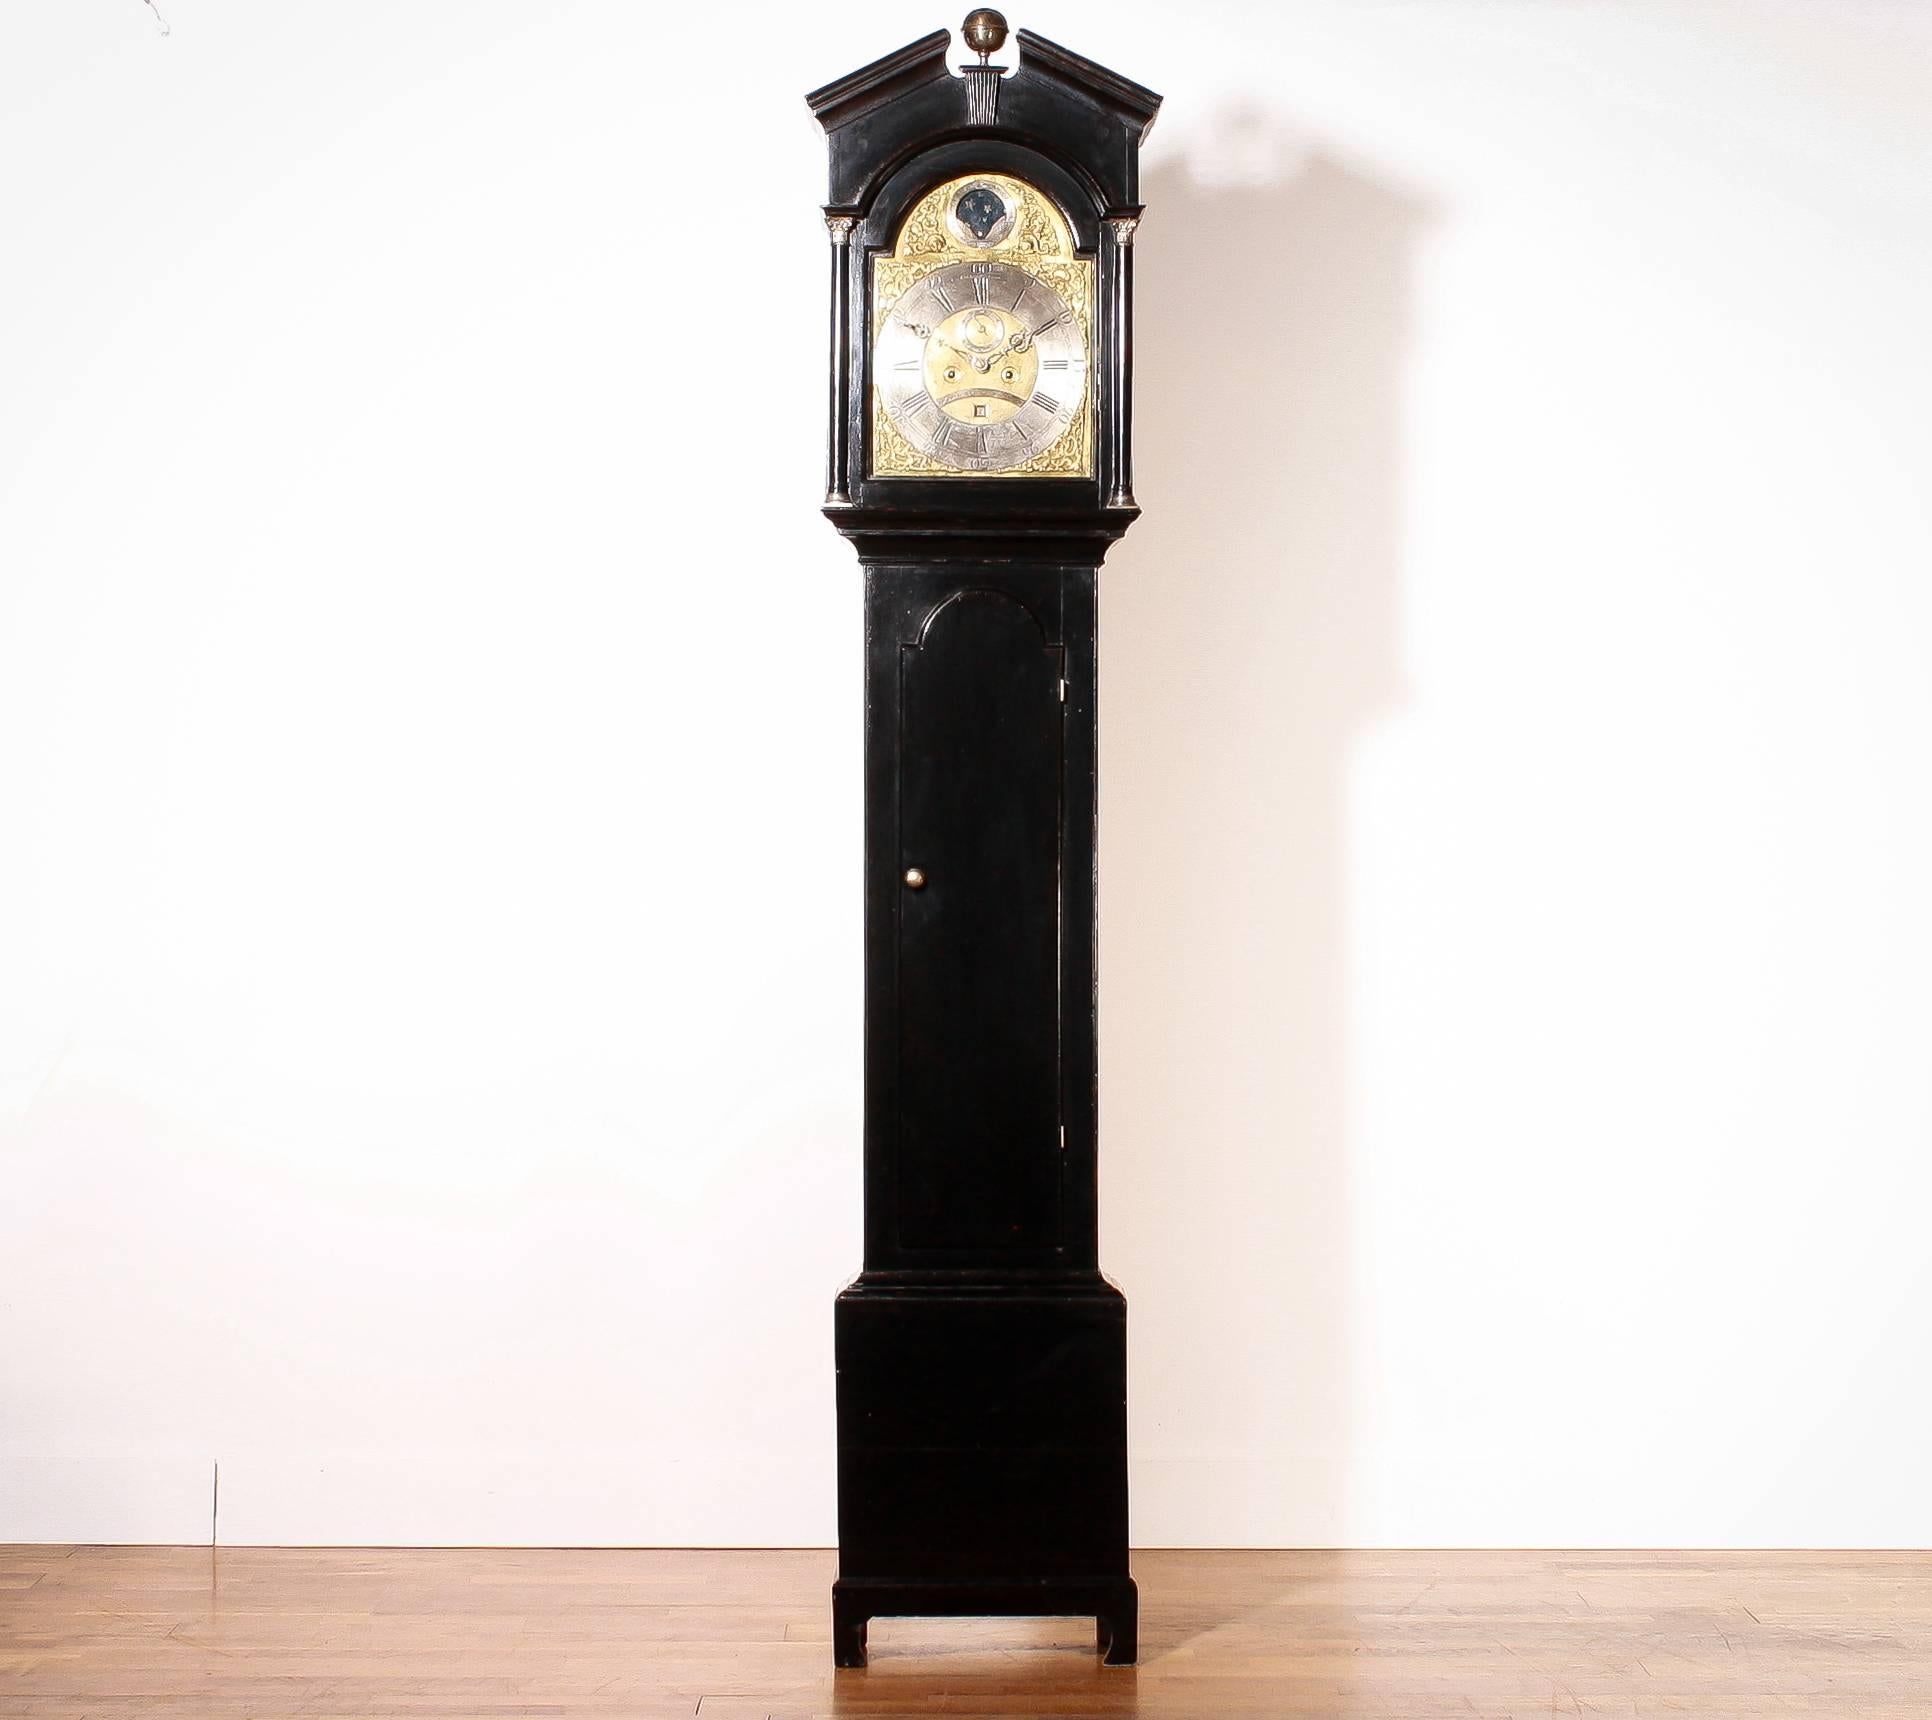 British Early 18th Century, London Longcase Clock in Black Polish in Excellent Condition